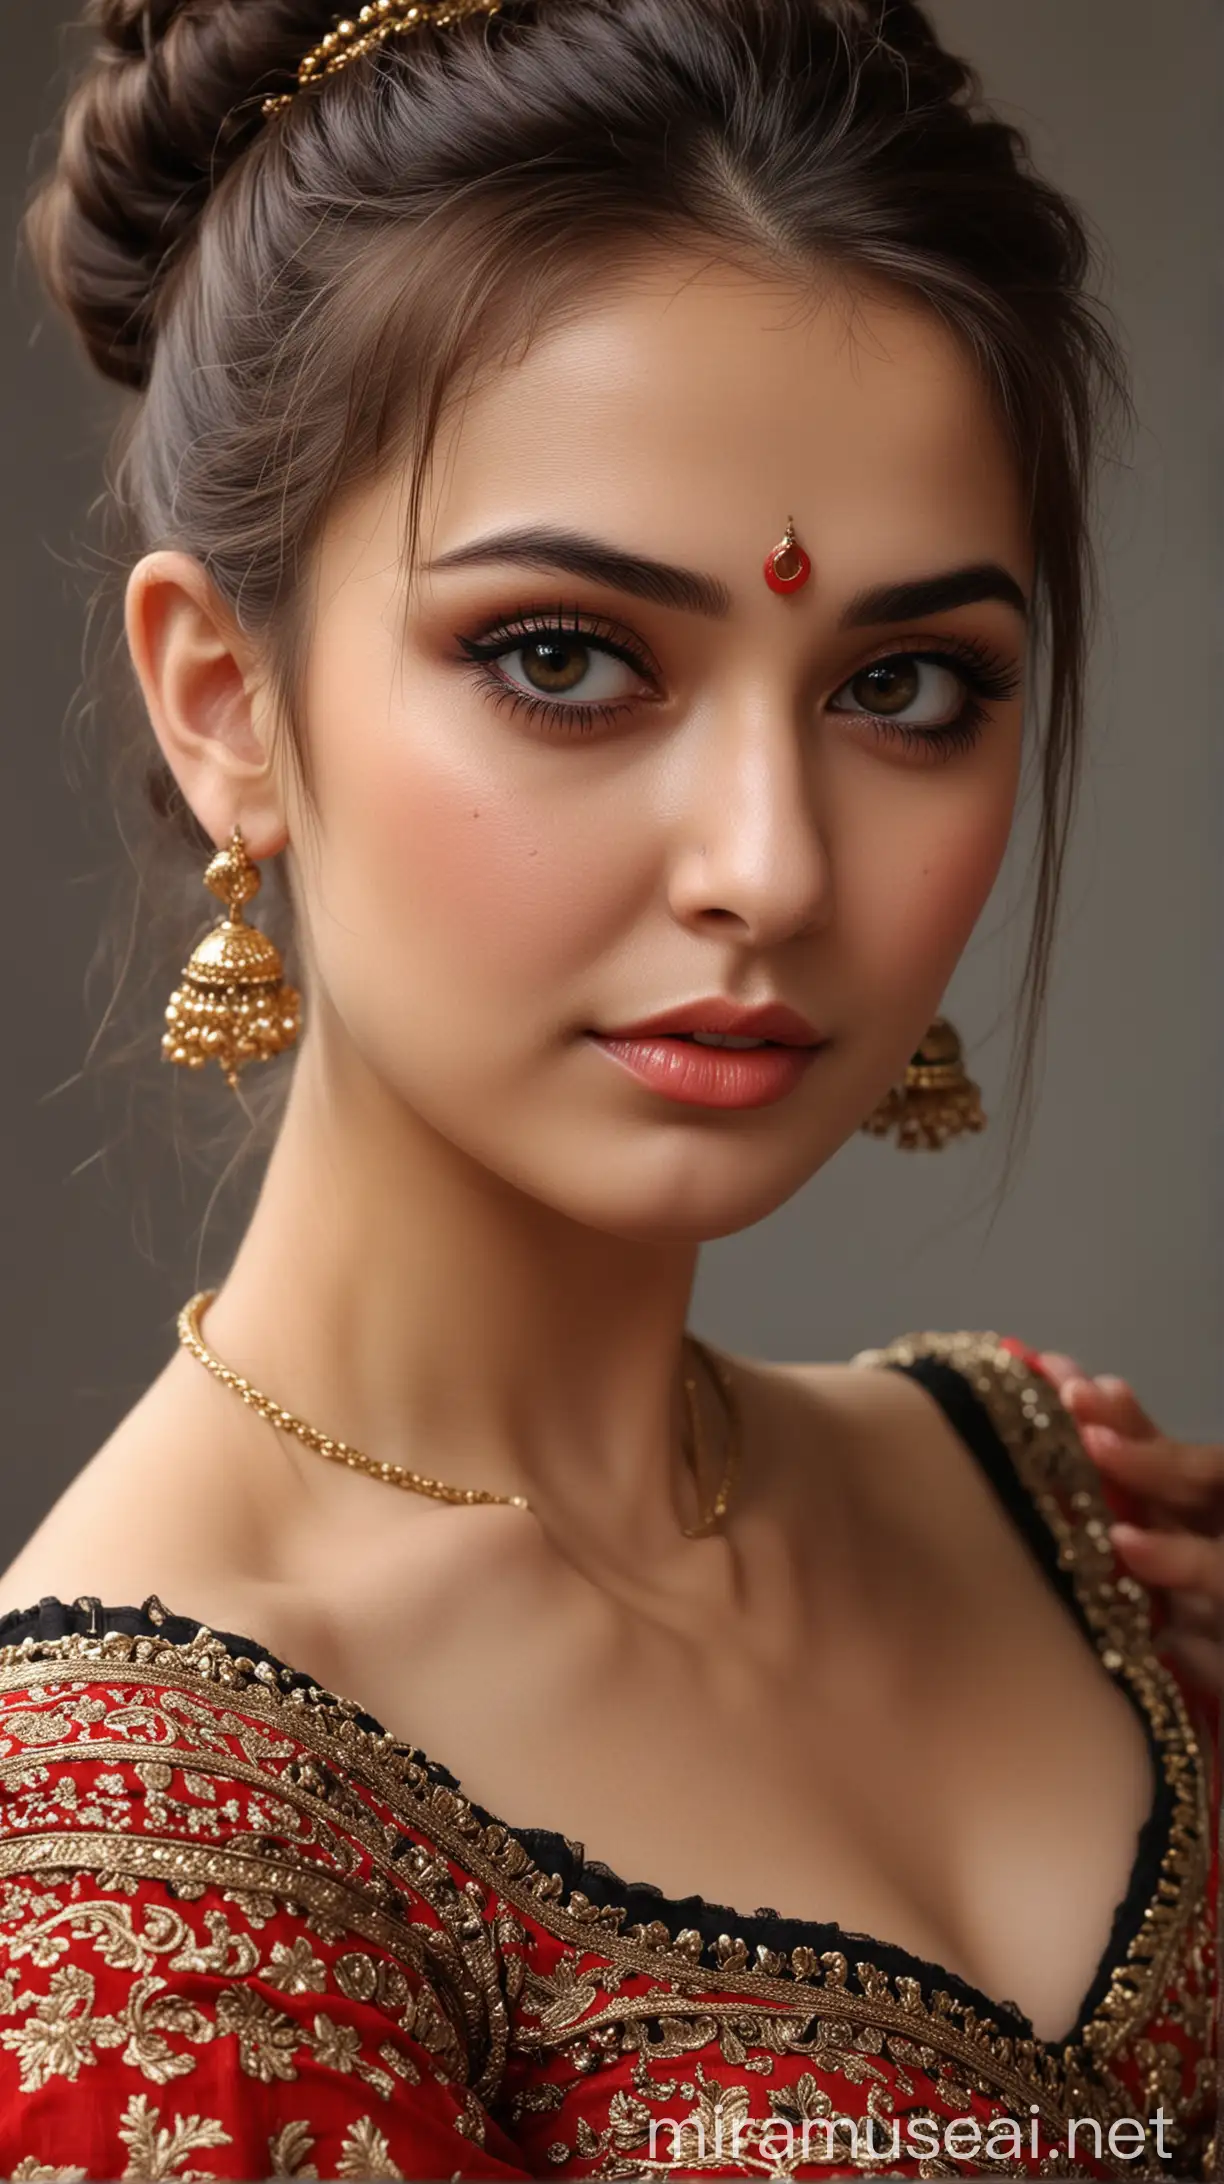 Beautiful Russian Girl with Indian Makeup in Ultra Realistic 4K Photography